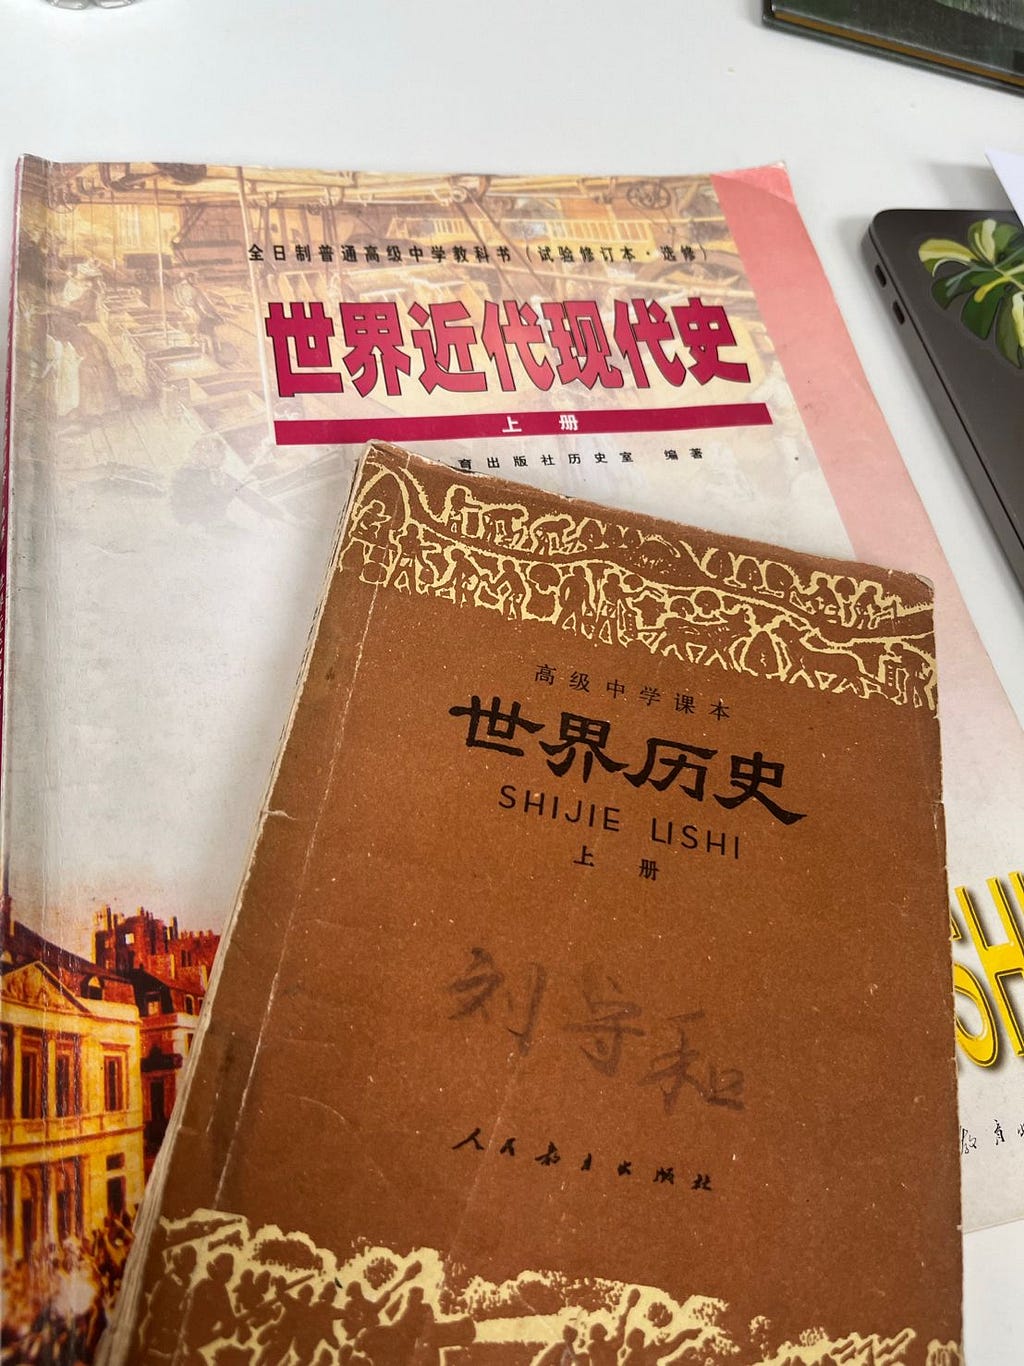 An photograph of two of the Chinese textbooks we studied in our seminar.